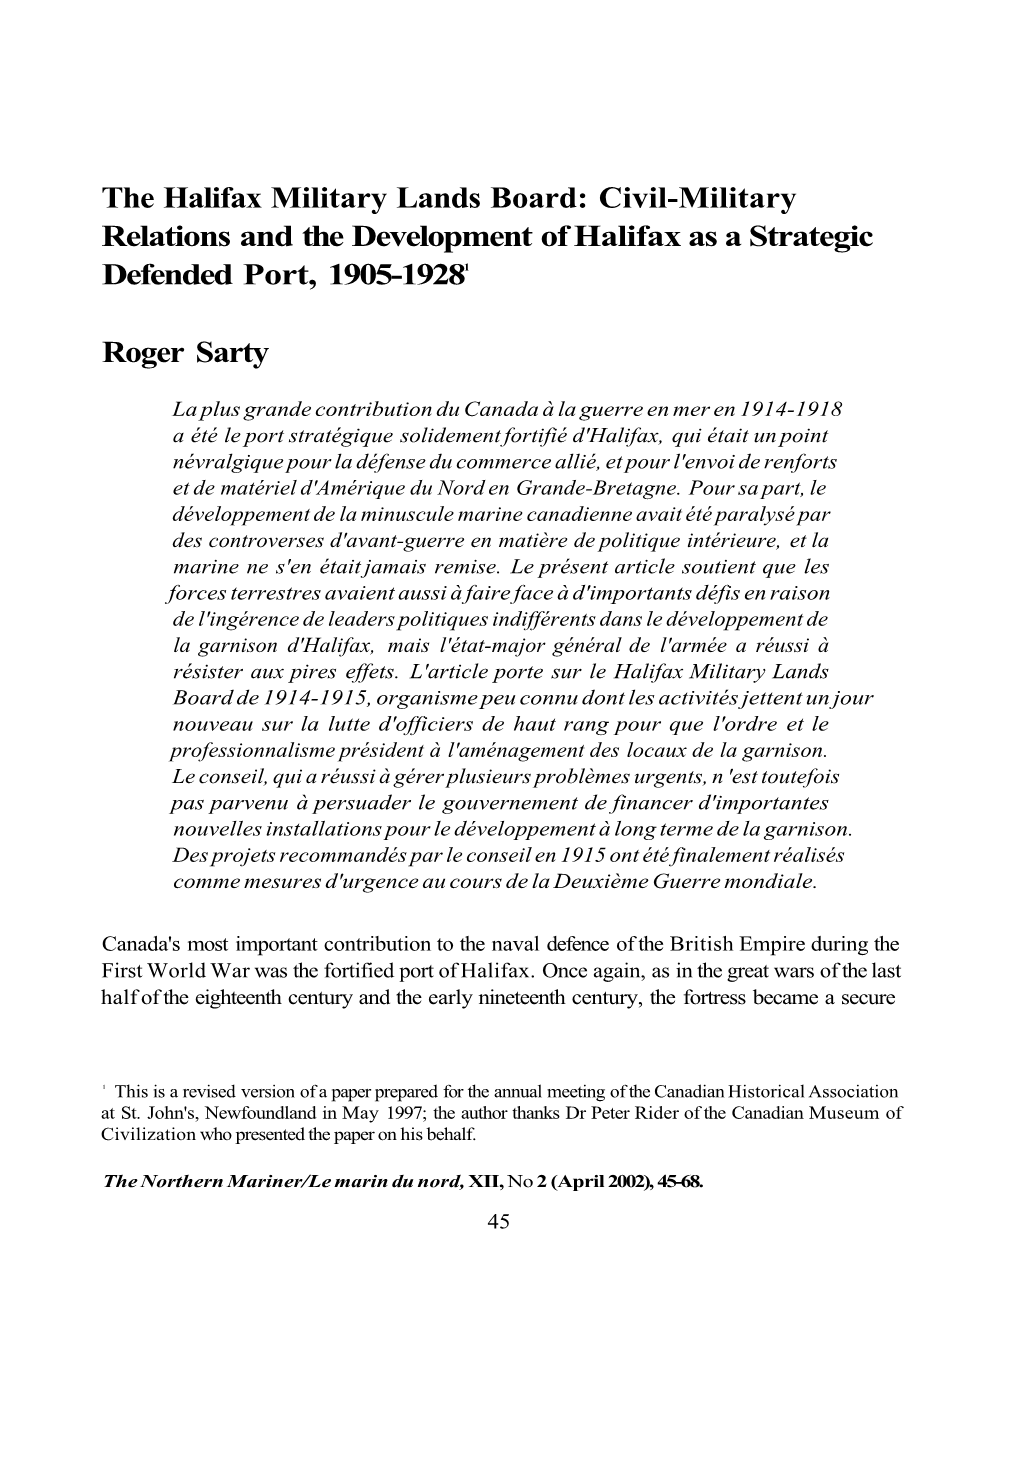 The Halifax Military Lands Board: Civil-Military Relations and the Development of Halifax As a Strategic Defended Port, 1905-19281